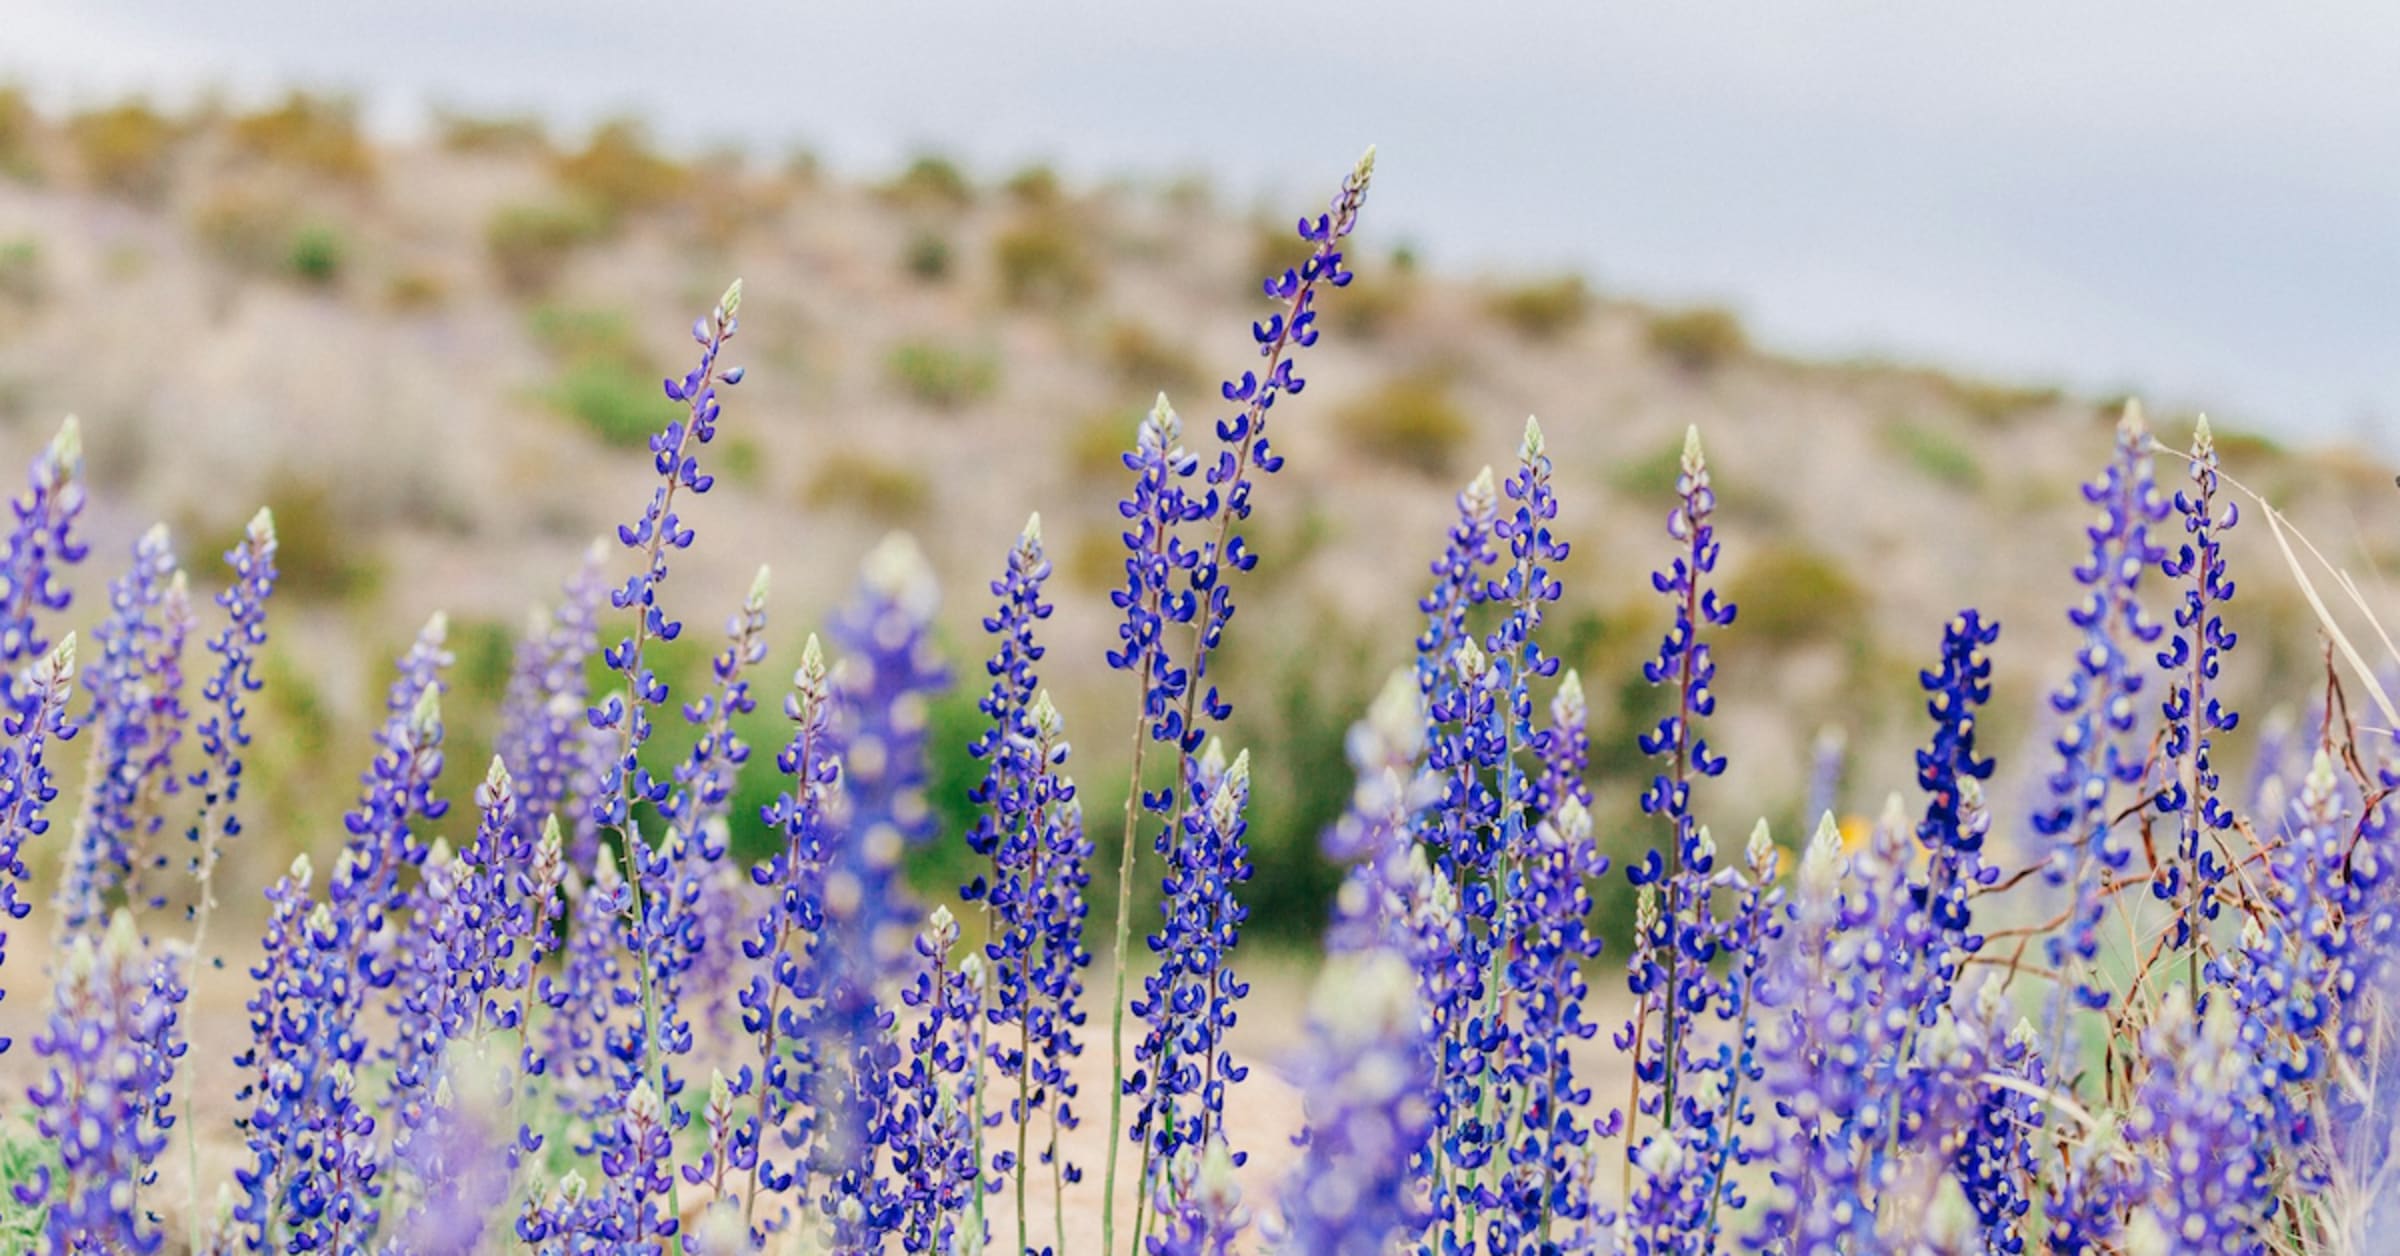 Where to See Bluebonnet Fields in Texas This Spring